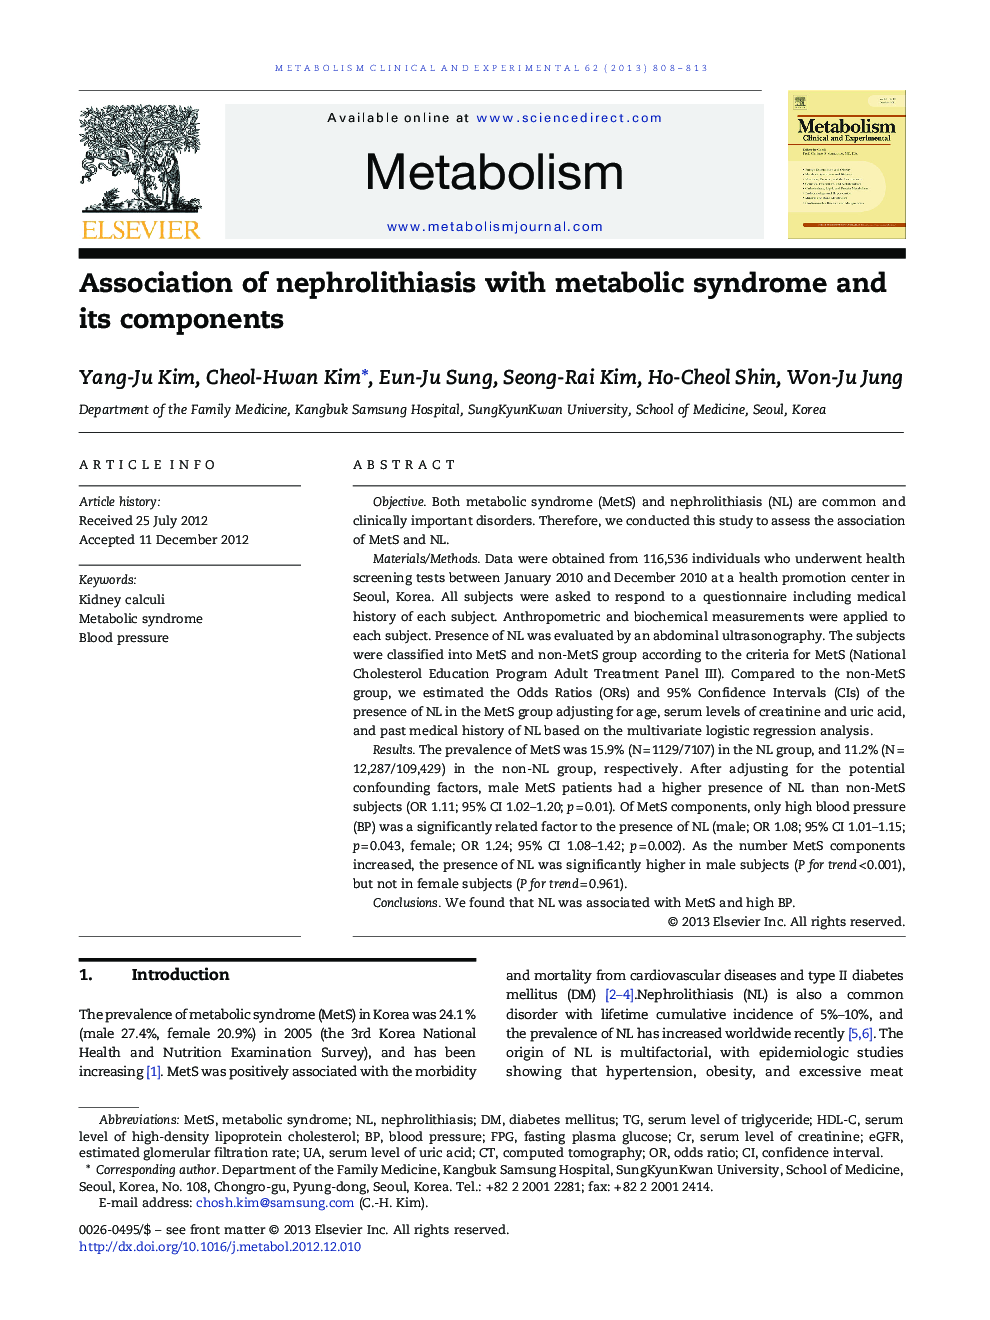 Association of nephrolithiasis with metabolic syndrome and its components